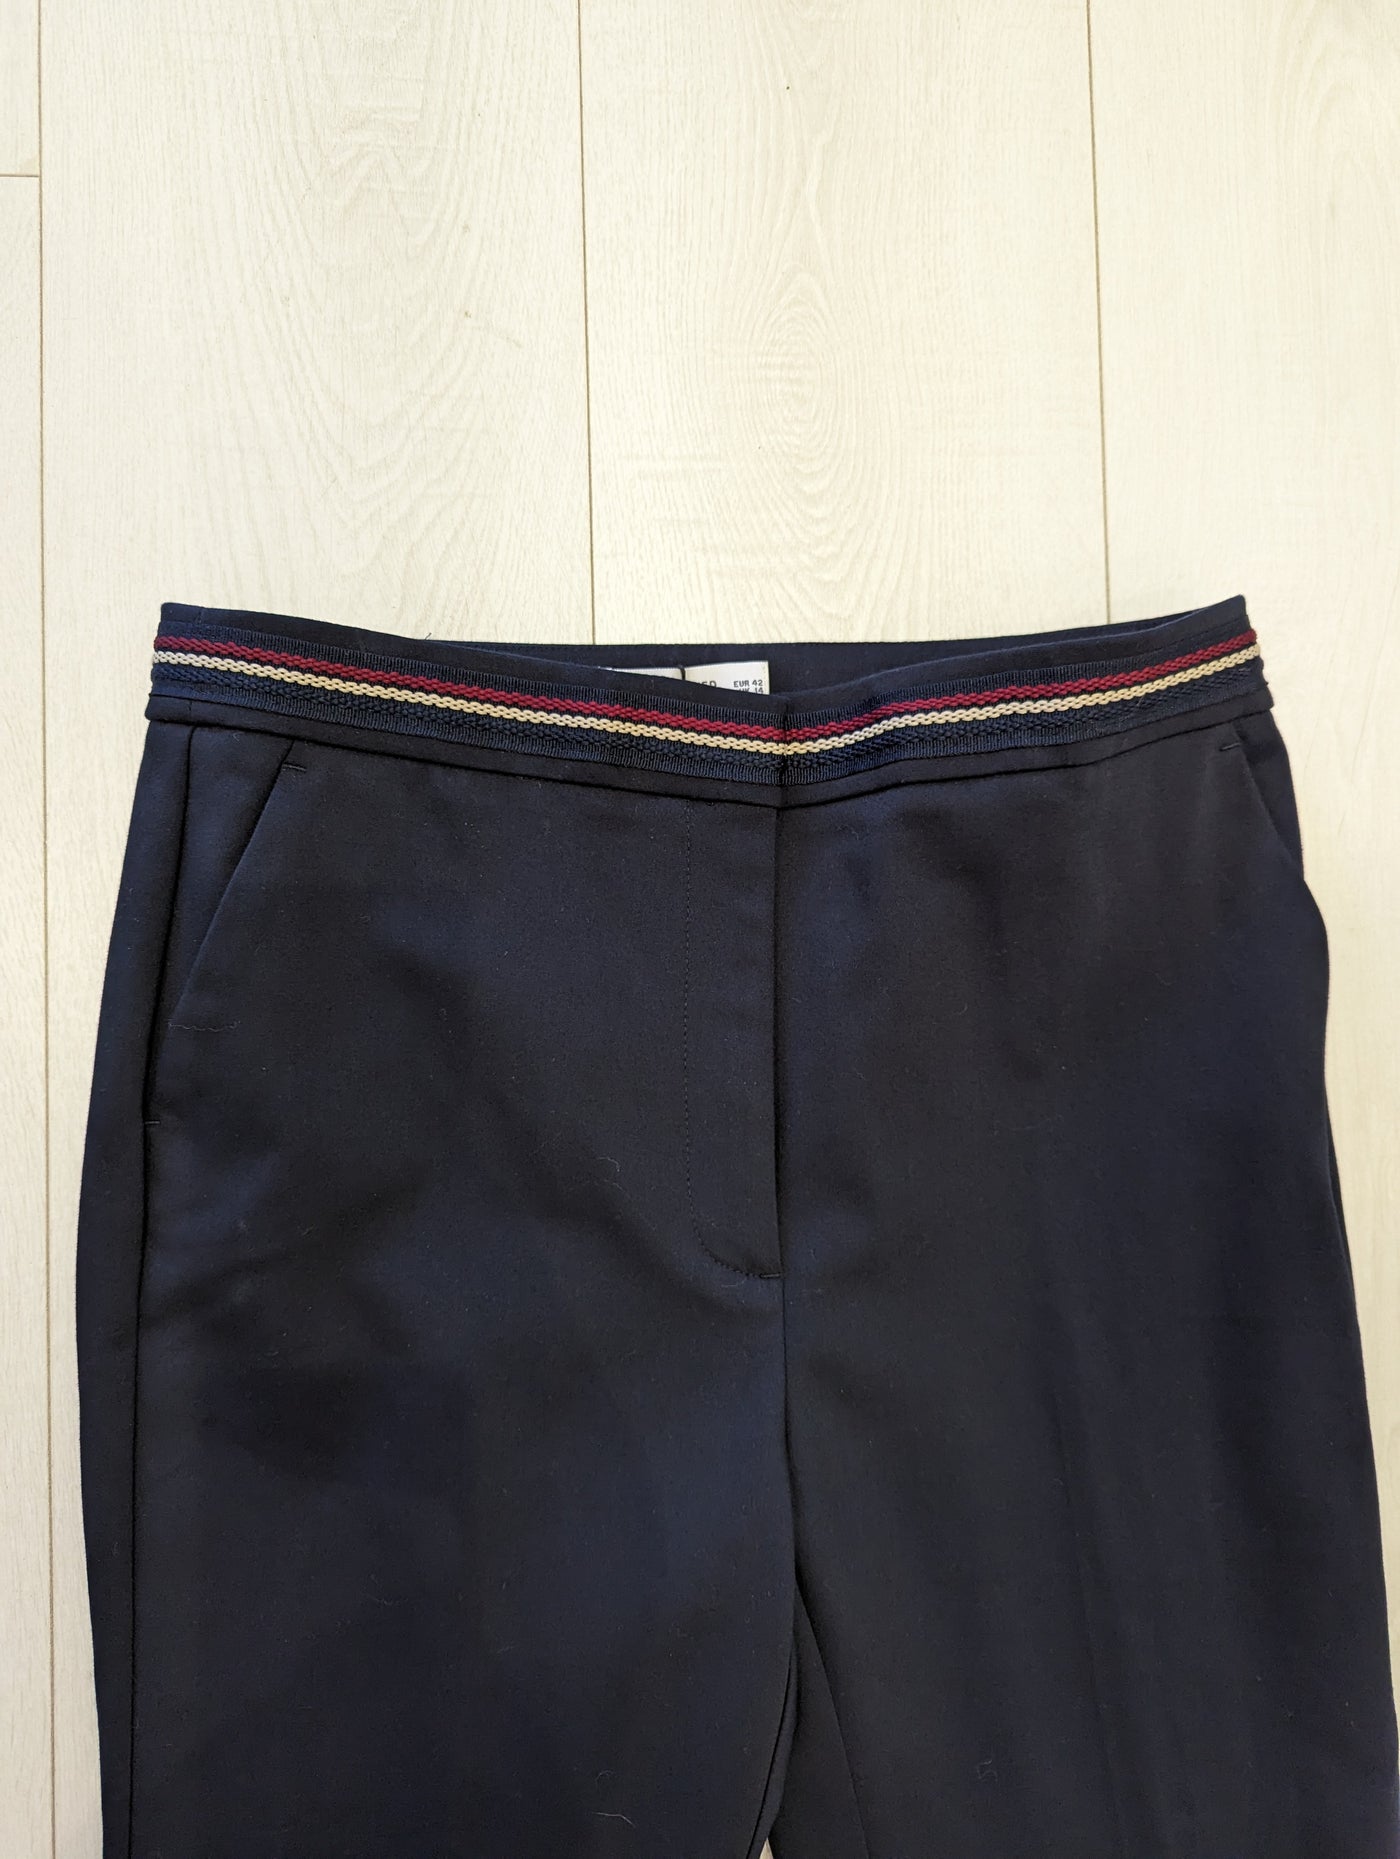 Reserved Navy Slim Leg Trousers 14 NWT £25